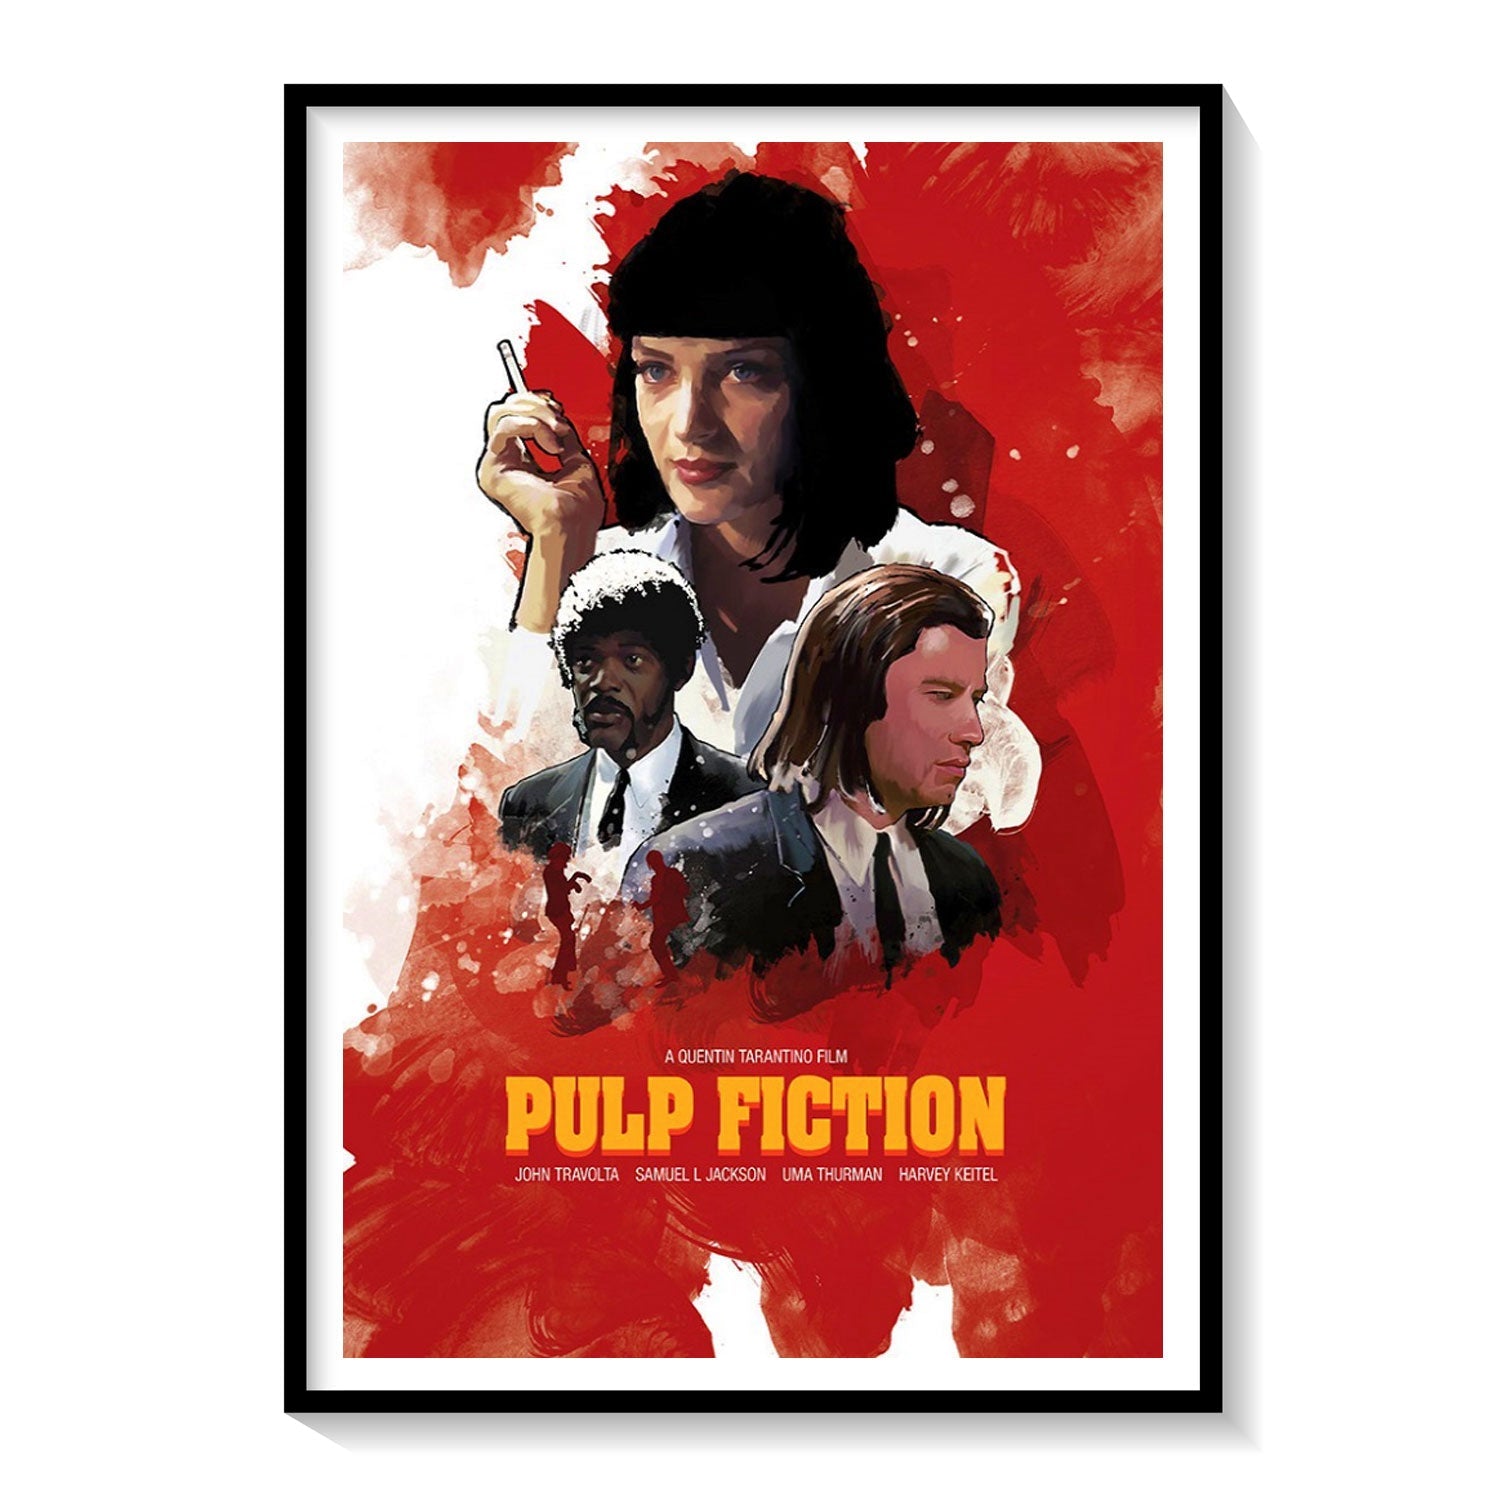 Pulp Fiction (1994) Movie Poster: Buy Hollywood & Famous Movie